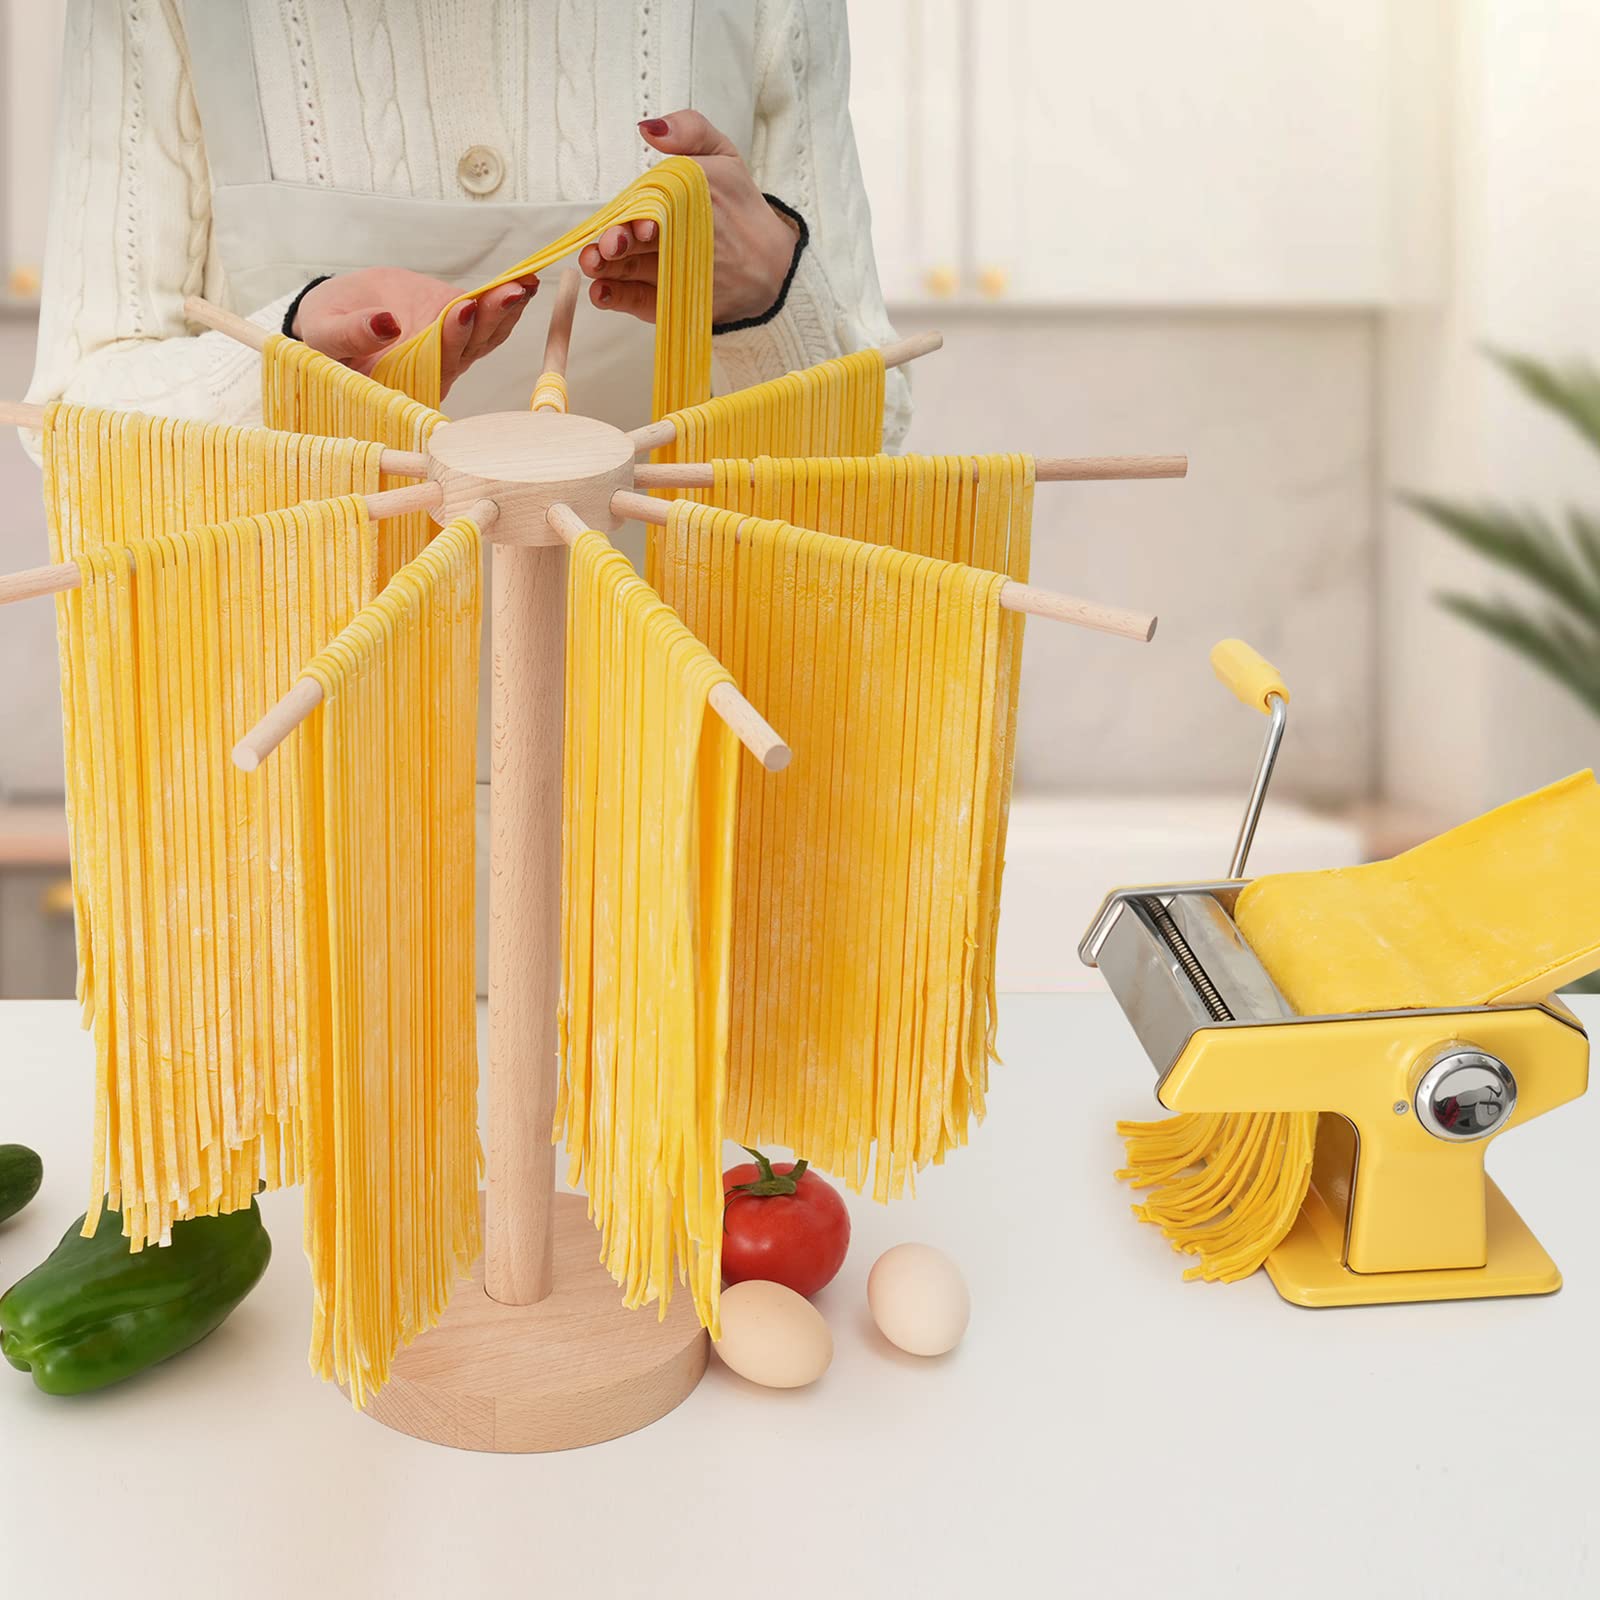 Pasta Drying Rack, Large Wood Pasta Rack Collapsible for Fresh Pasta Noodle Spaghetti Dryer Hanger Stand